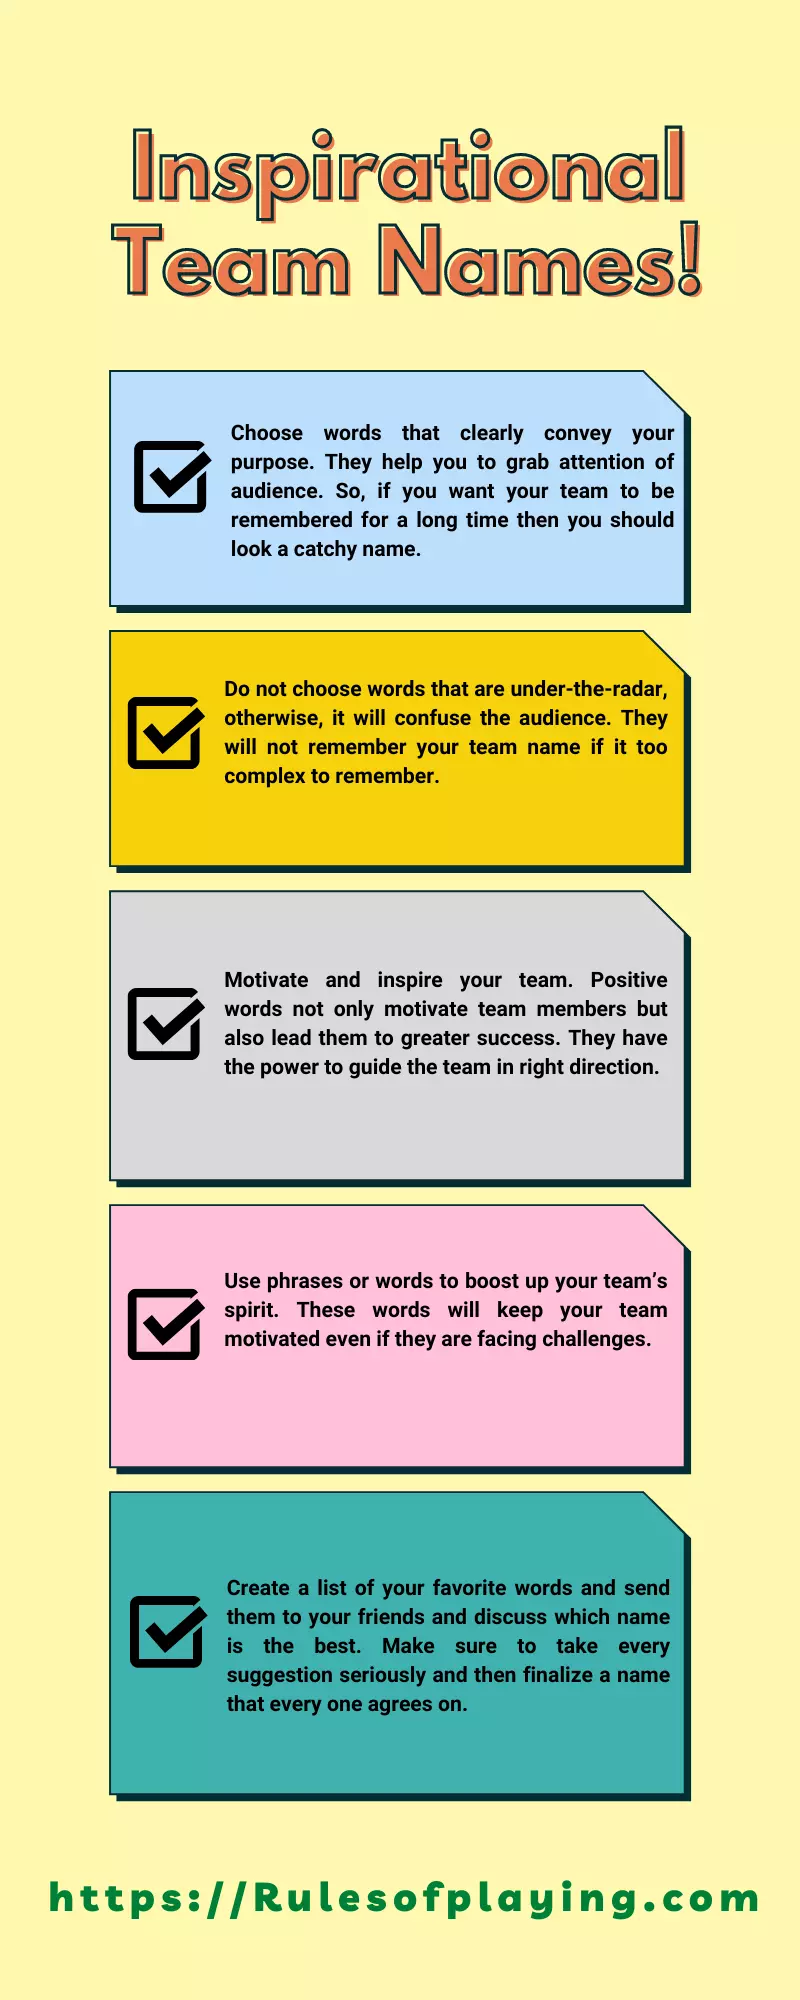 Inspirational Team Names Guide- How to Create